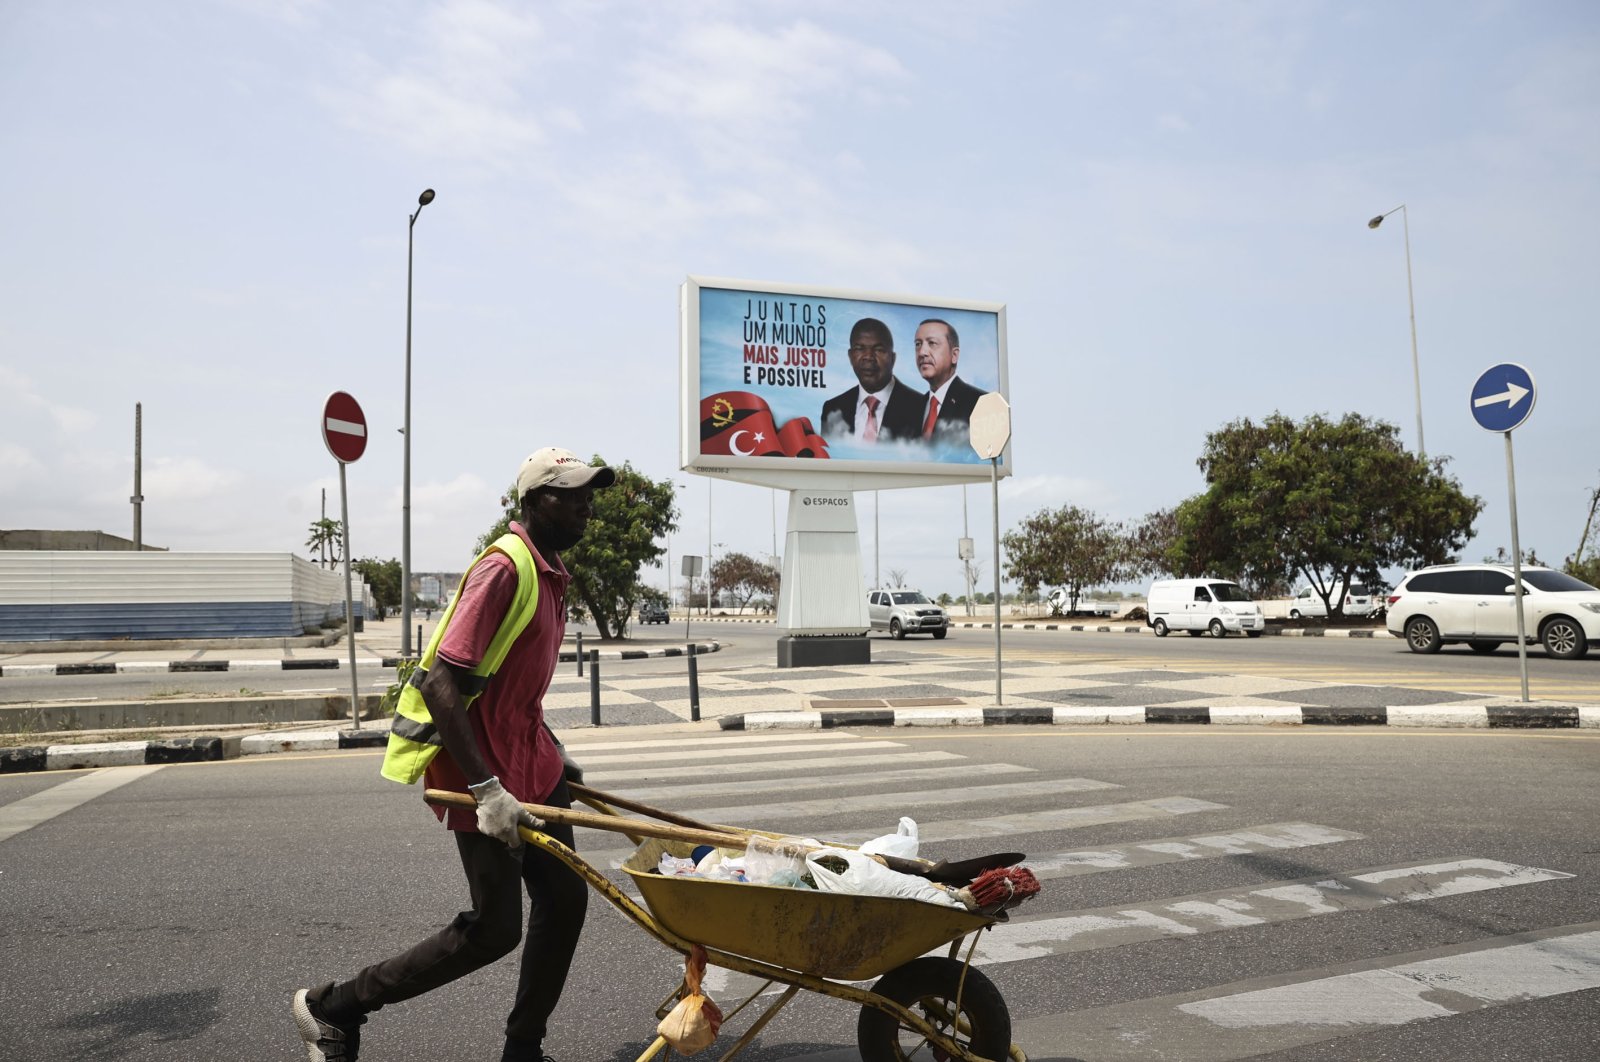 A worker passes by the poster of President Recep Tayyip Erdoğan and President of Angola Joao Lourenco that reads "Together a Fairer World is Possible" in the capital Luanda, Angola, Oct. 19, 2021. (AA Photo)